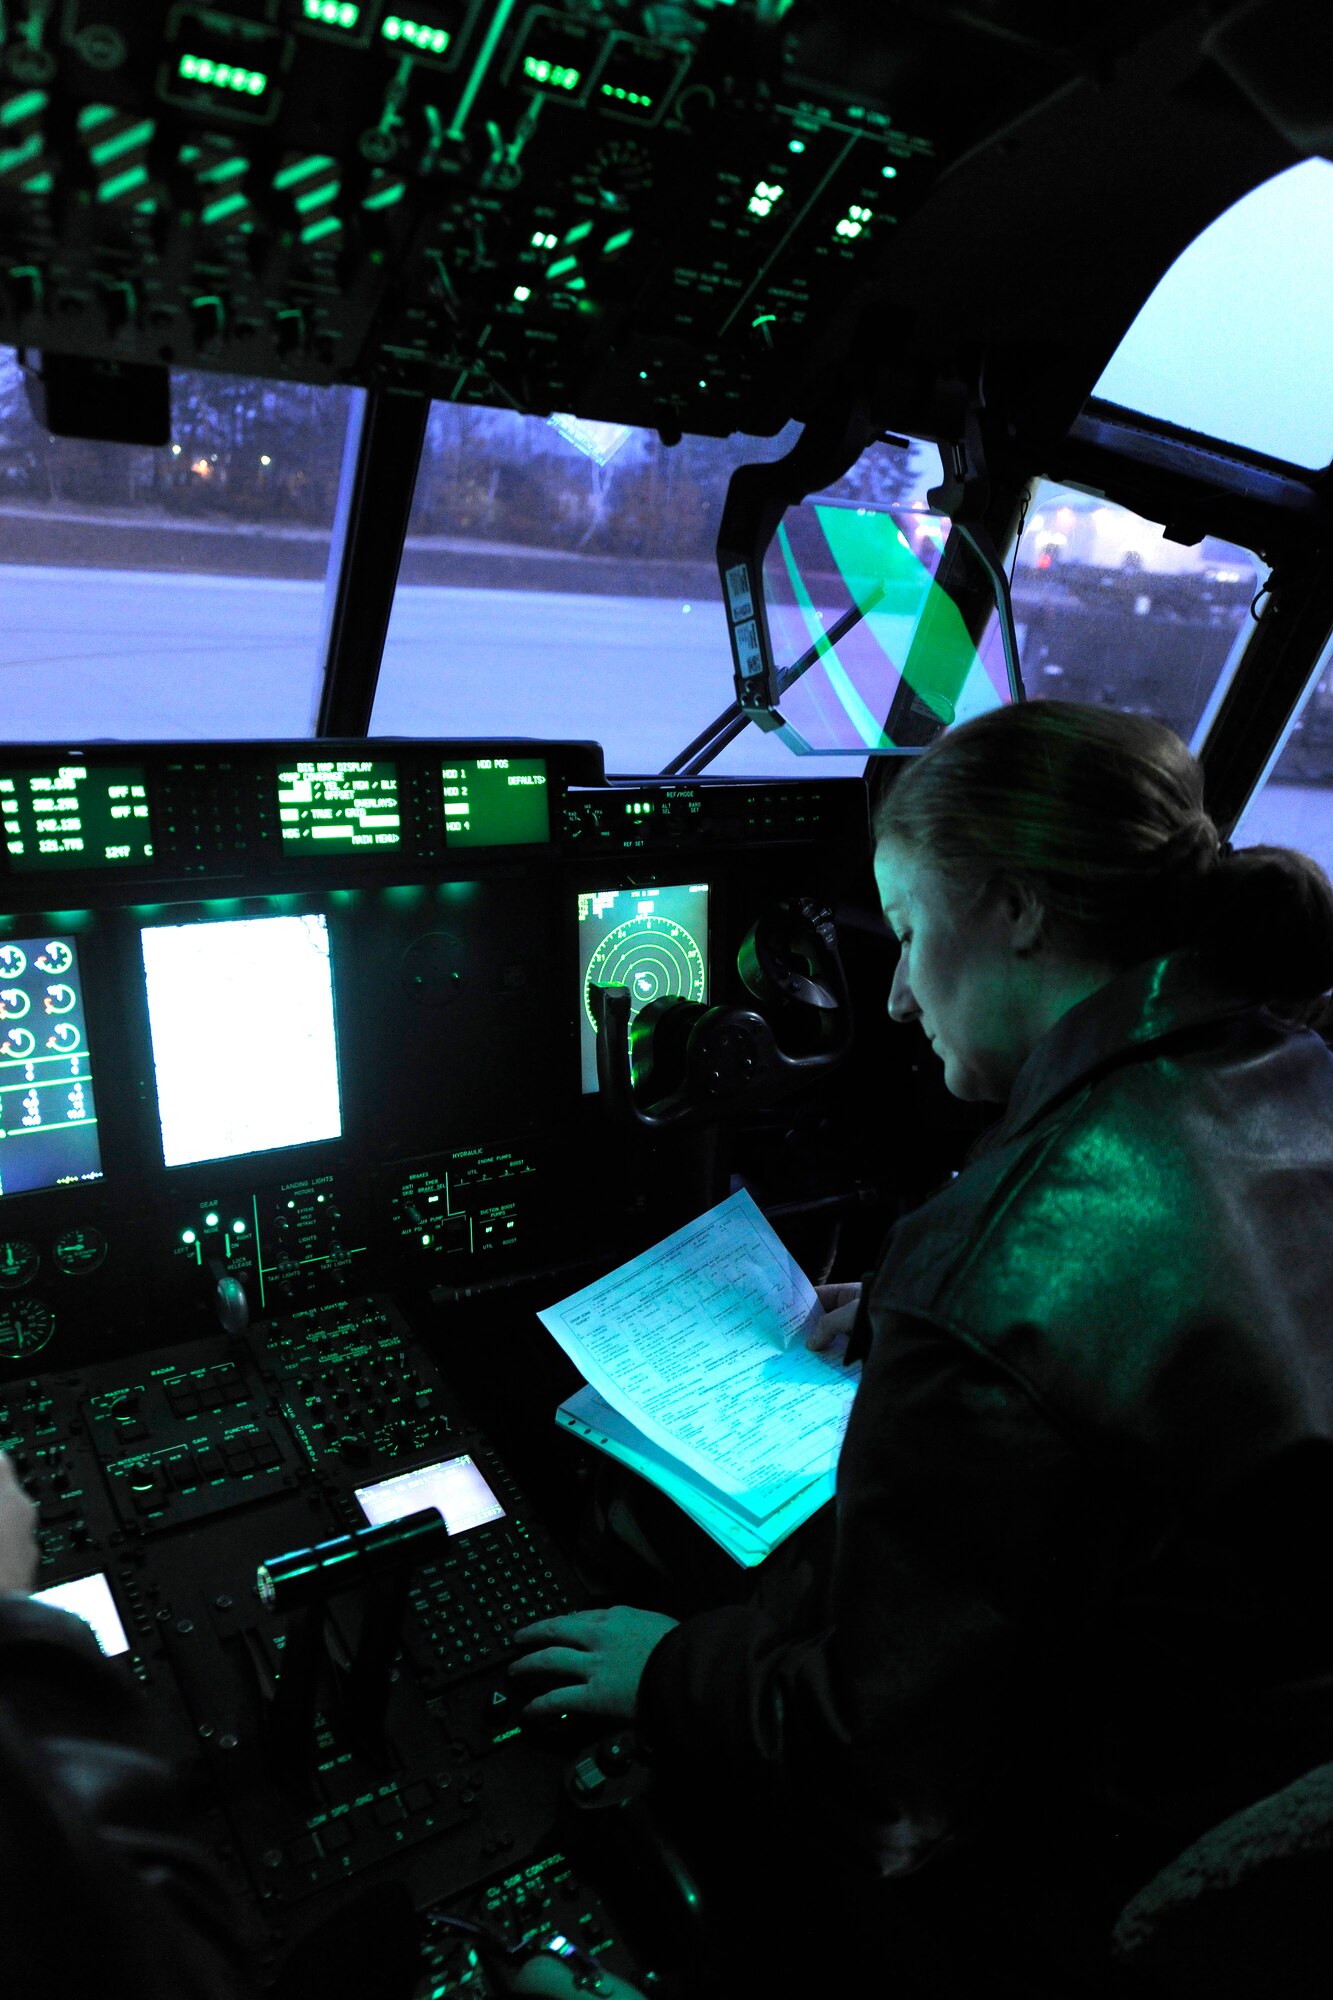 Capt. Marci Walton, 37th Airlift Squadron instructor pilot, goes through the pre-flight checklist in the flight deck of a C-130J, March 16, 2012, at Ramstein Air Base, Germany.  The 37th AS completed a week-long airdrop training exercise with a ten-bundle container deployment system at a drop zone near Grafenwoehr, Germany.  (U.S. Air Force photo/Staff Sgt. Chris Willis)